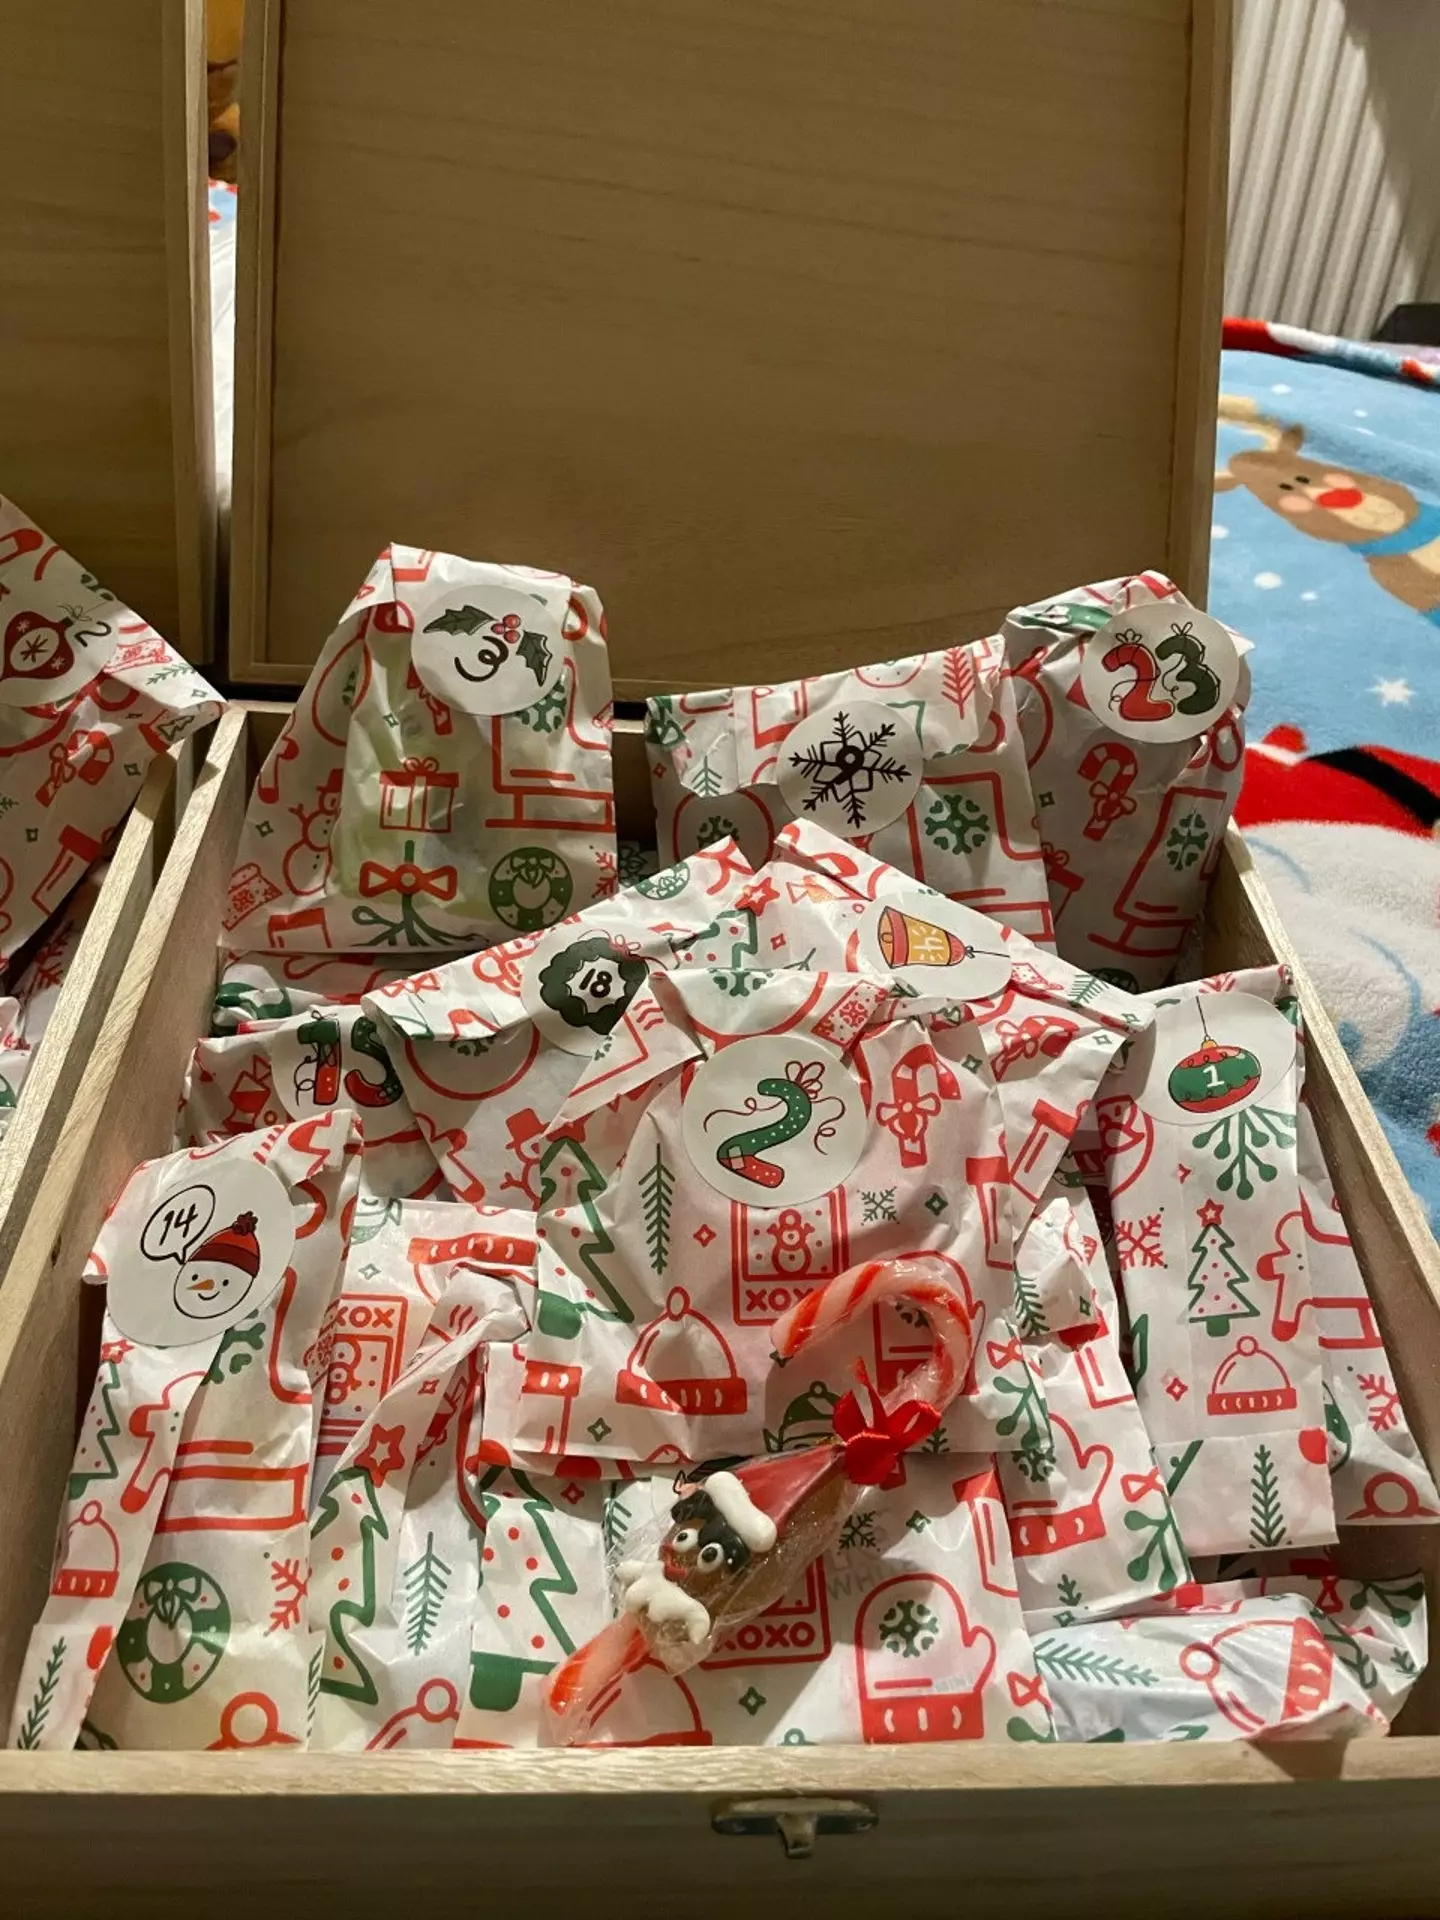 The presents - one for each day of December - were individually wrapped by Karina.